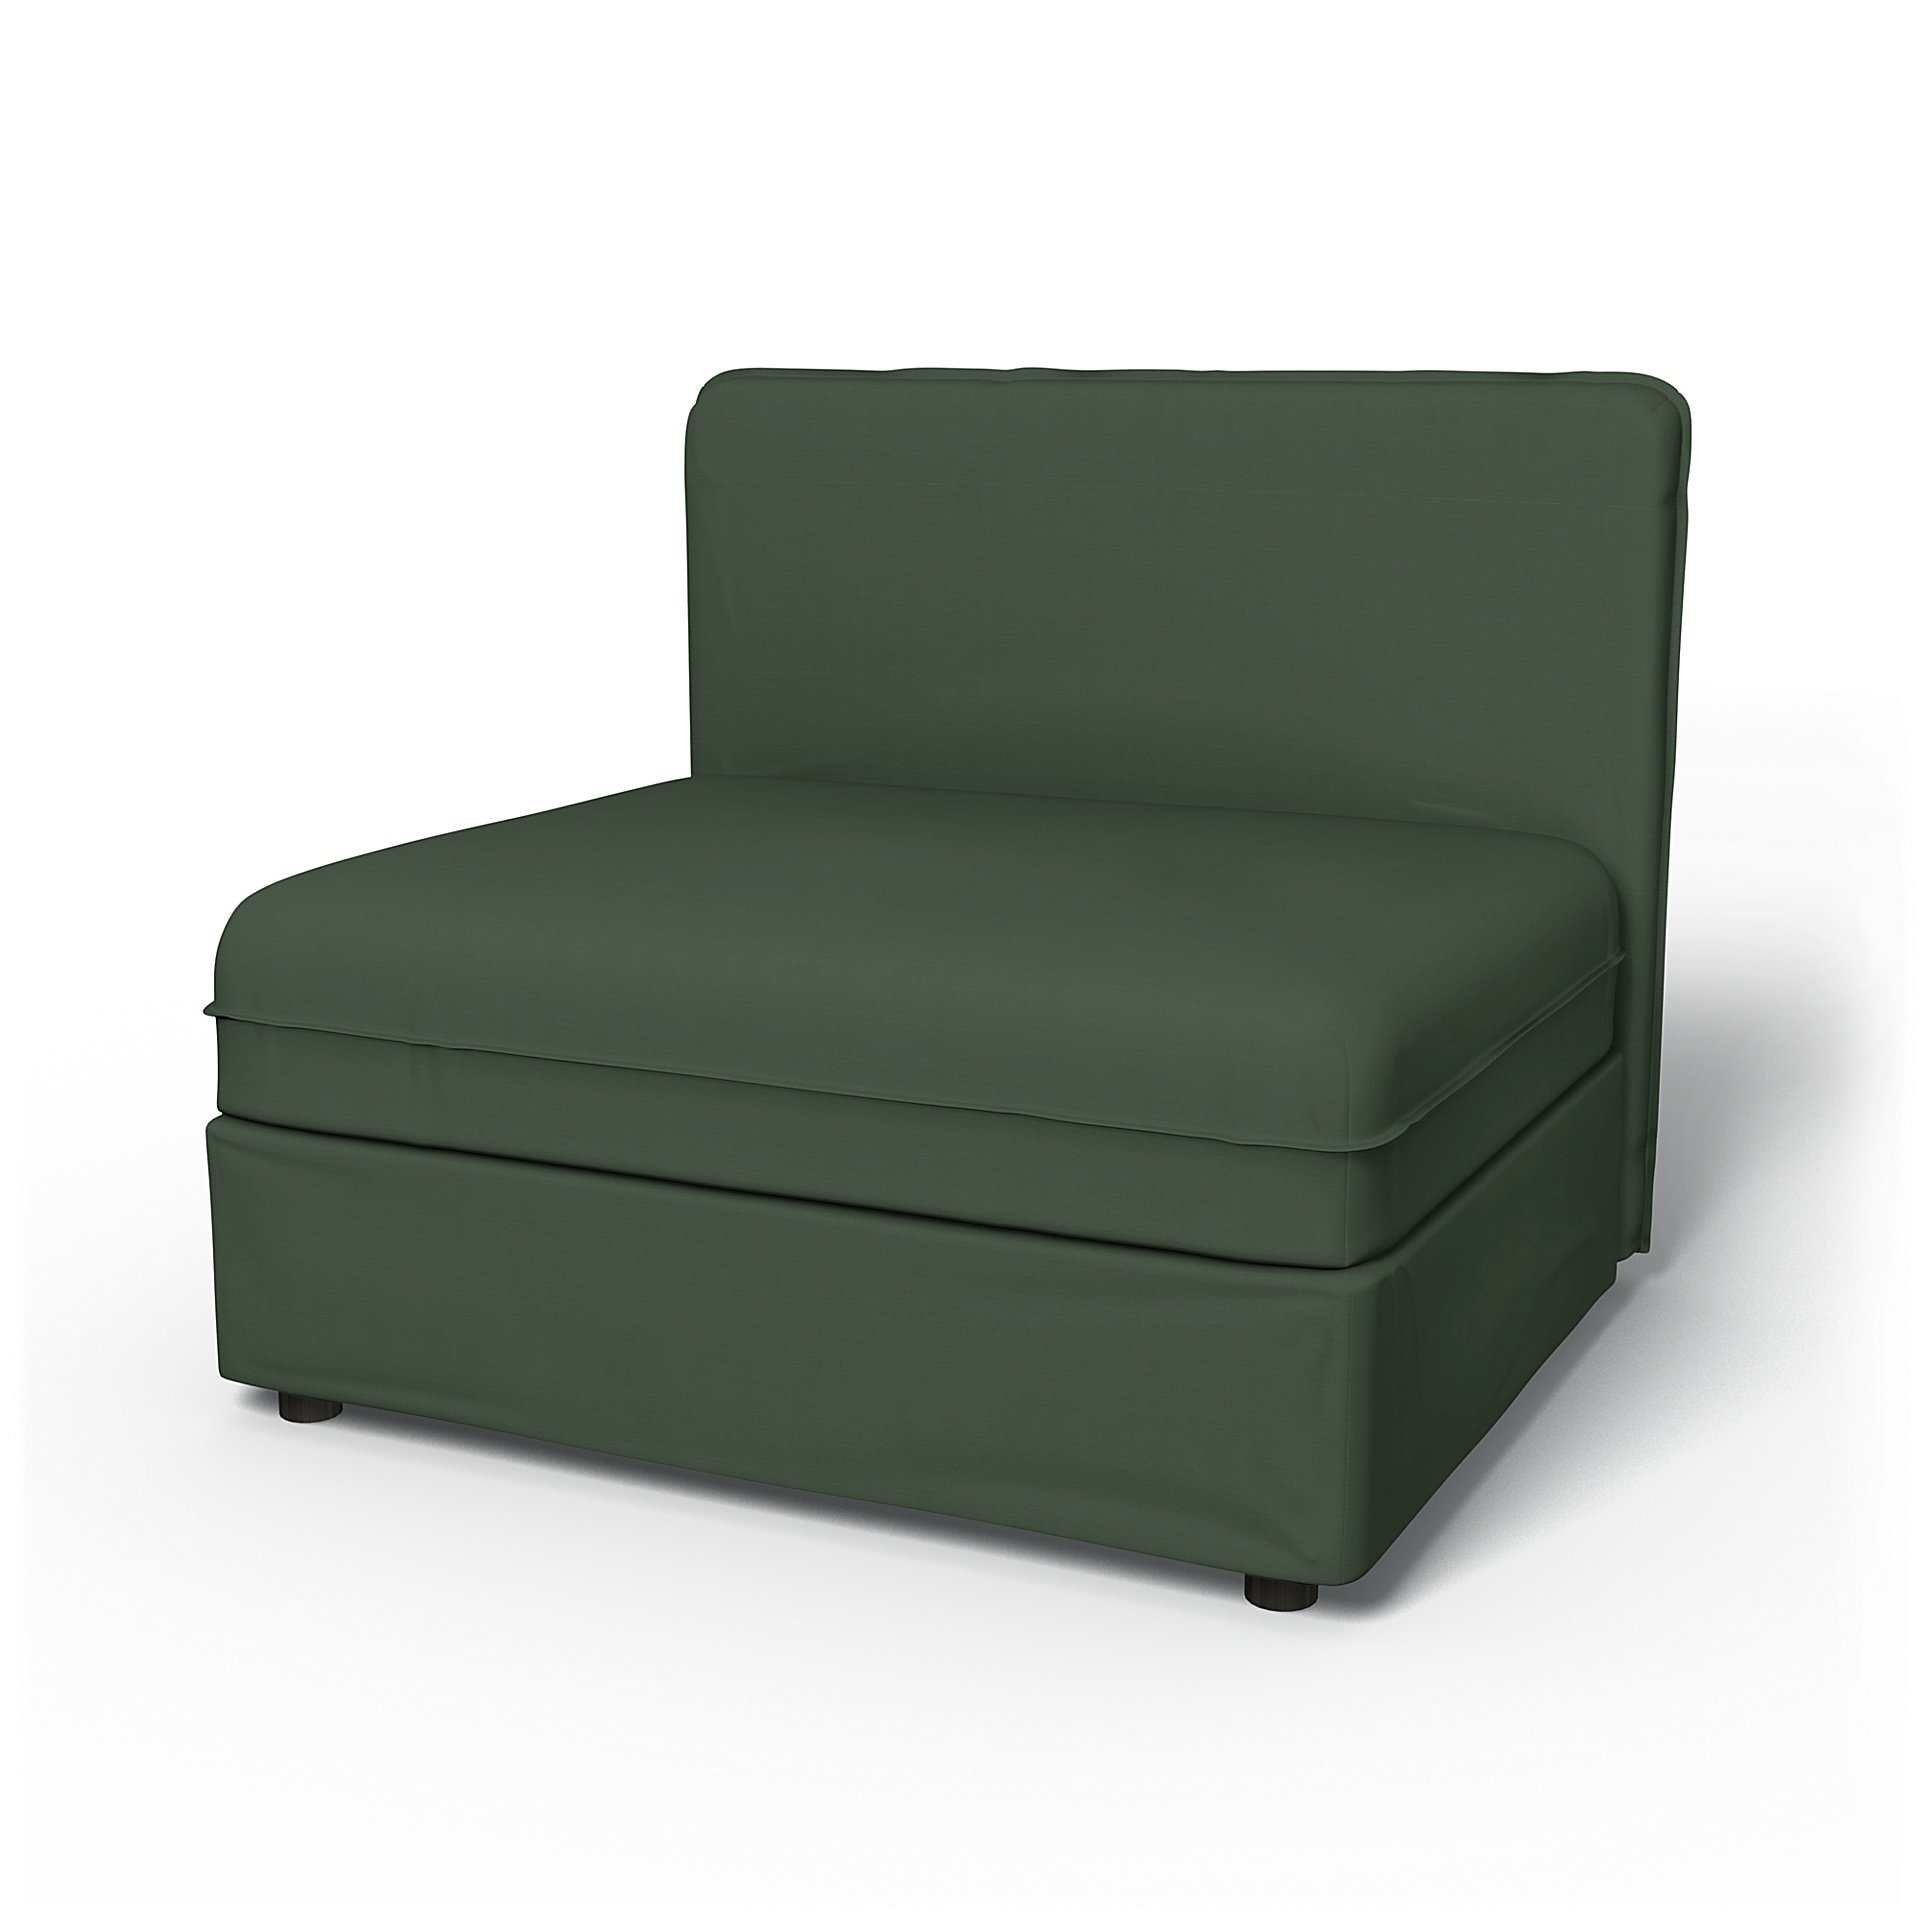 IKEA - Vallentuna Seat Module with Low Back Cover 100x80cm 39x32in, Thyme, Cotton - Bemz